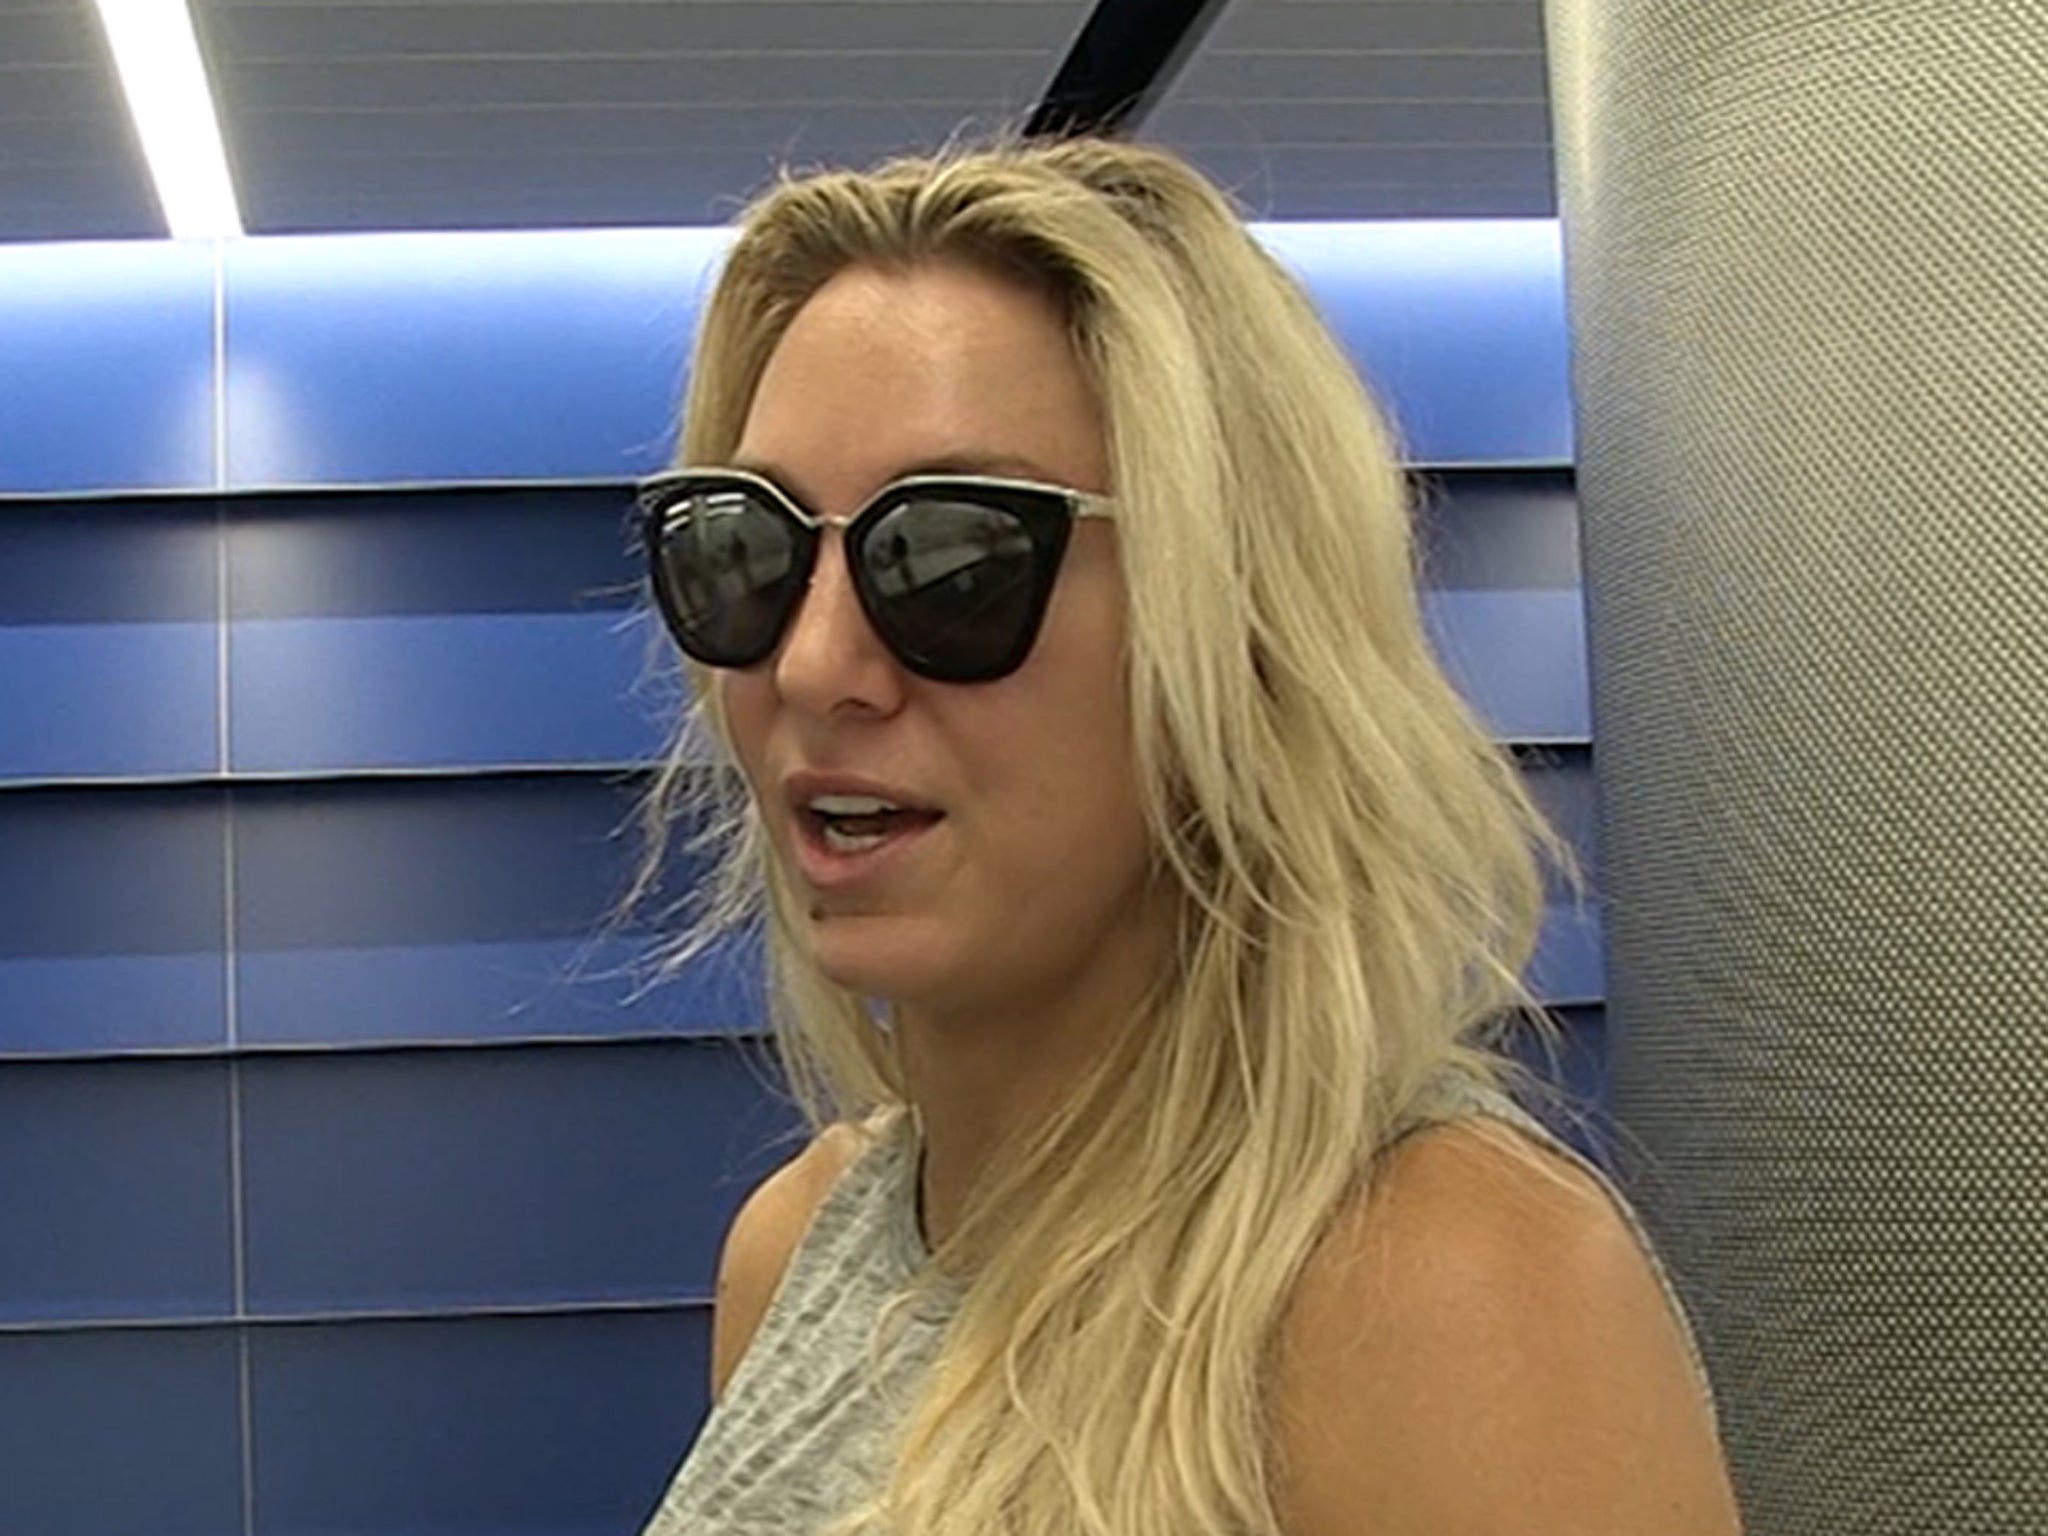 Wwe Charlotte Flair Hot Sex - WWE's Charlotte Flair: Ronda Rousey 'Knows Where to Find Me'